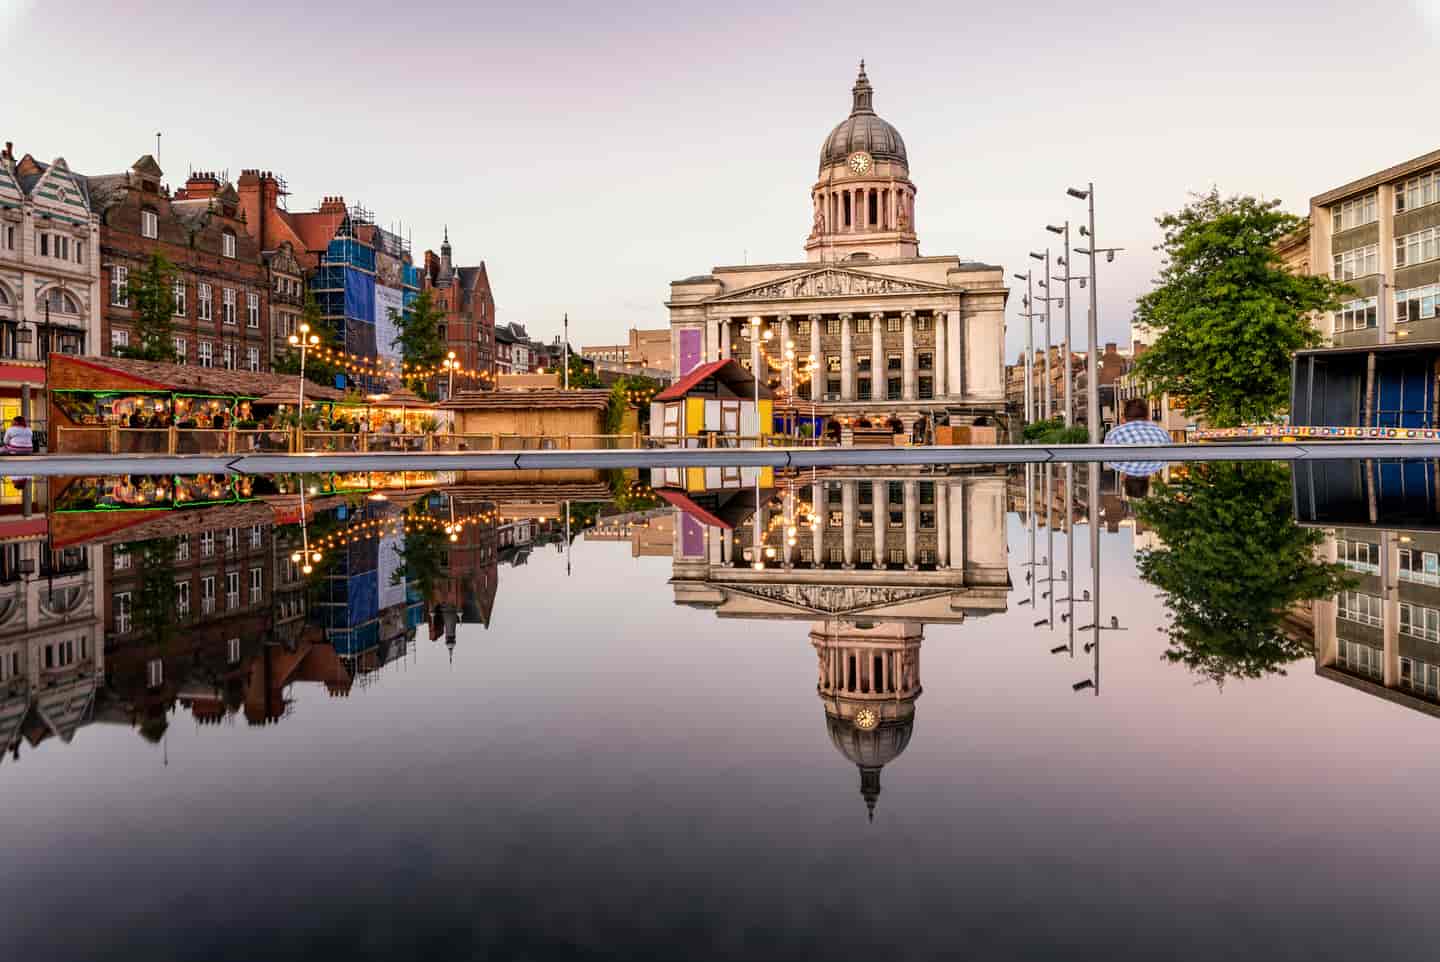 Student Accommodation in Nottingham - Nottingham Council House from Old Market Square